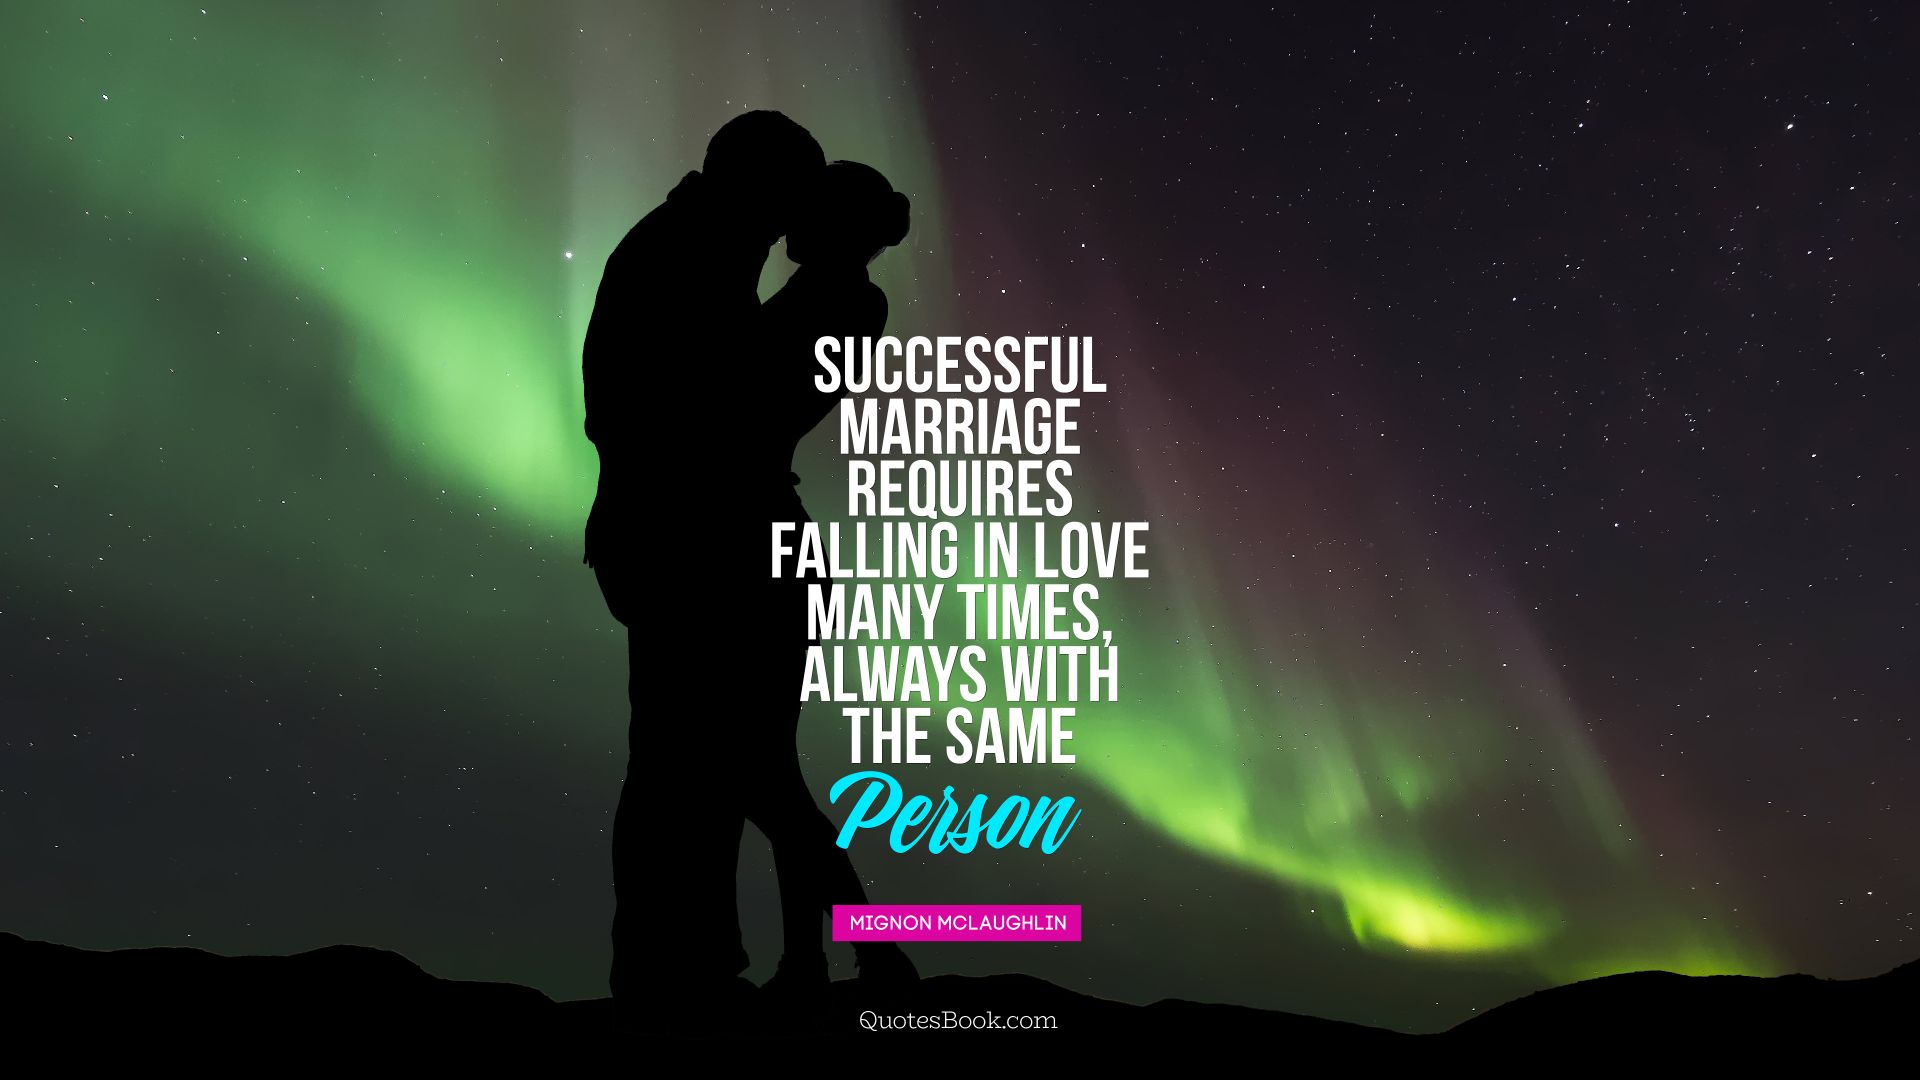 A successful marriage requires falling in love many times, always with the same person. - Quote by Mignon McLaughlin